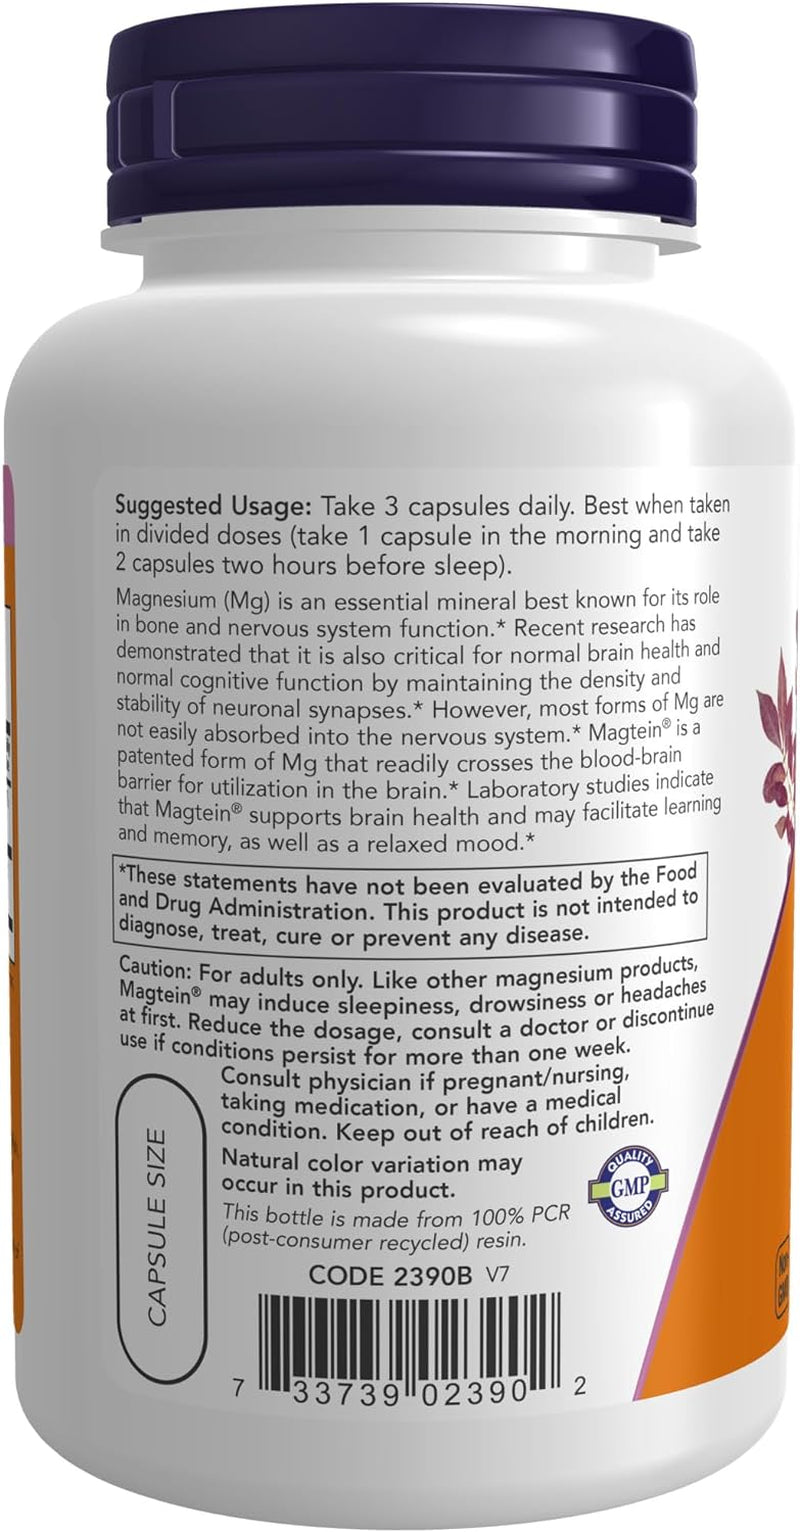 NOW Supplements, Magtein? with Patented Form of Magnesium (Mg), Cognitive Support*, 90 Veg Capsules